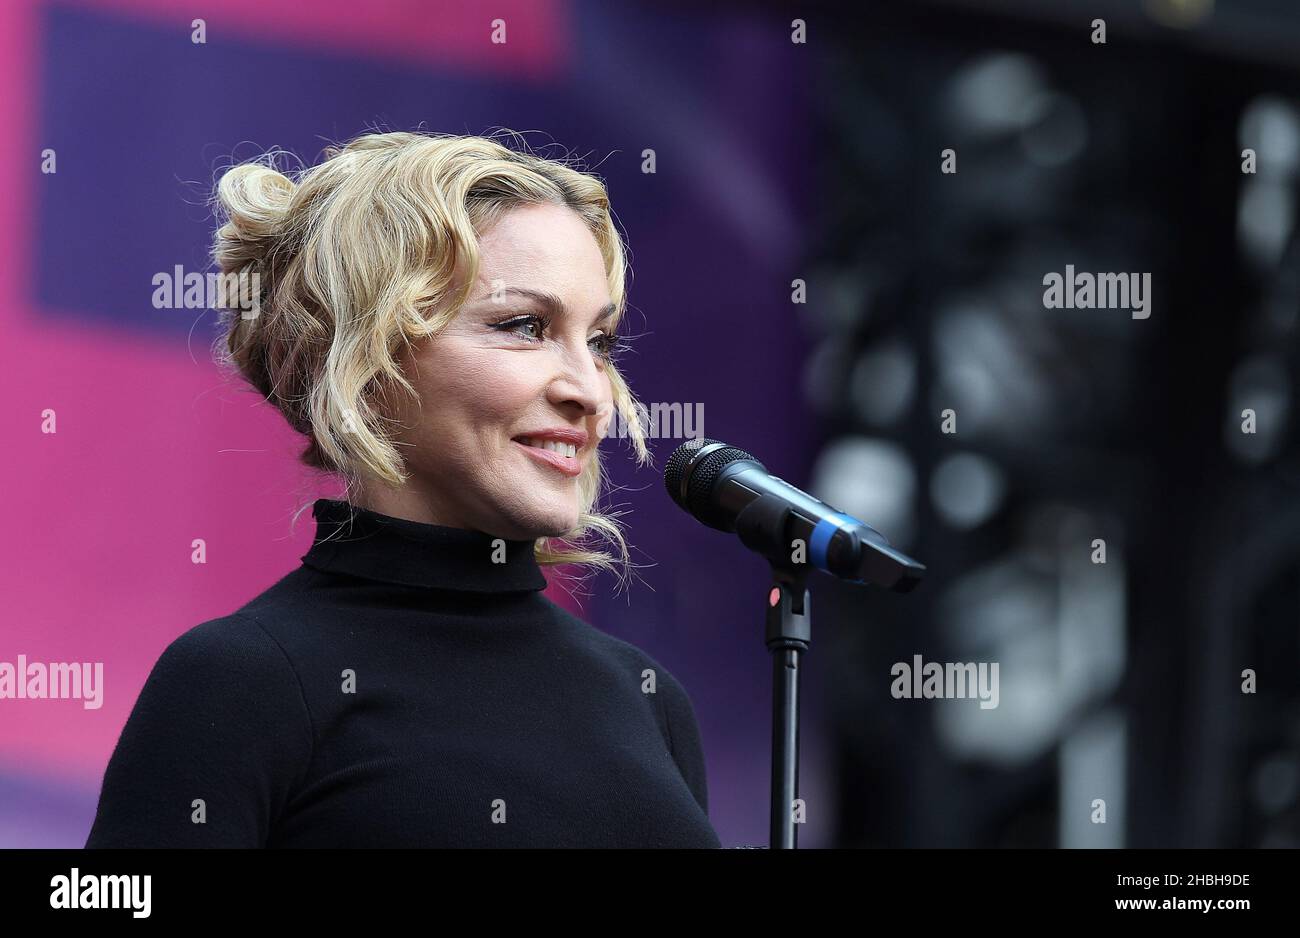 Madonna on stage at Sound of Change Live Concert at Chime for Change at Twickenham, London. Stock Photo